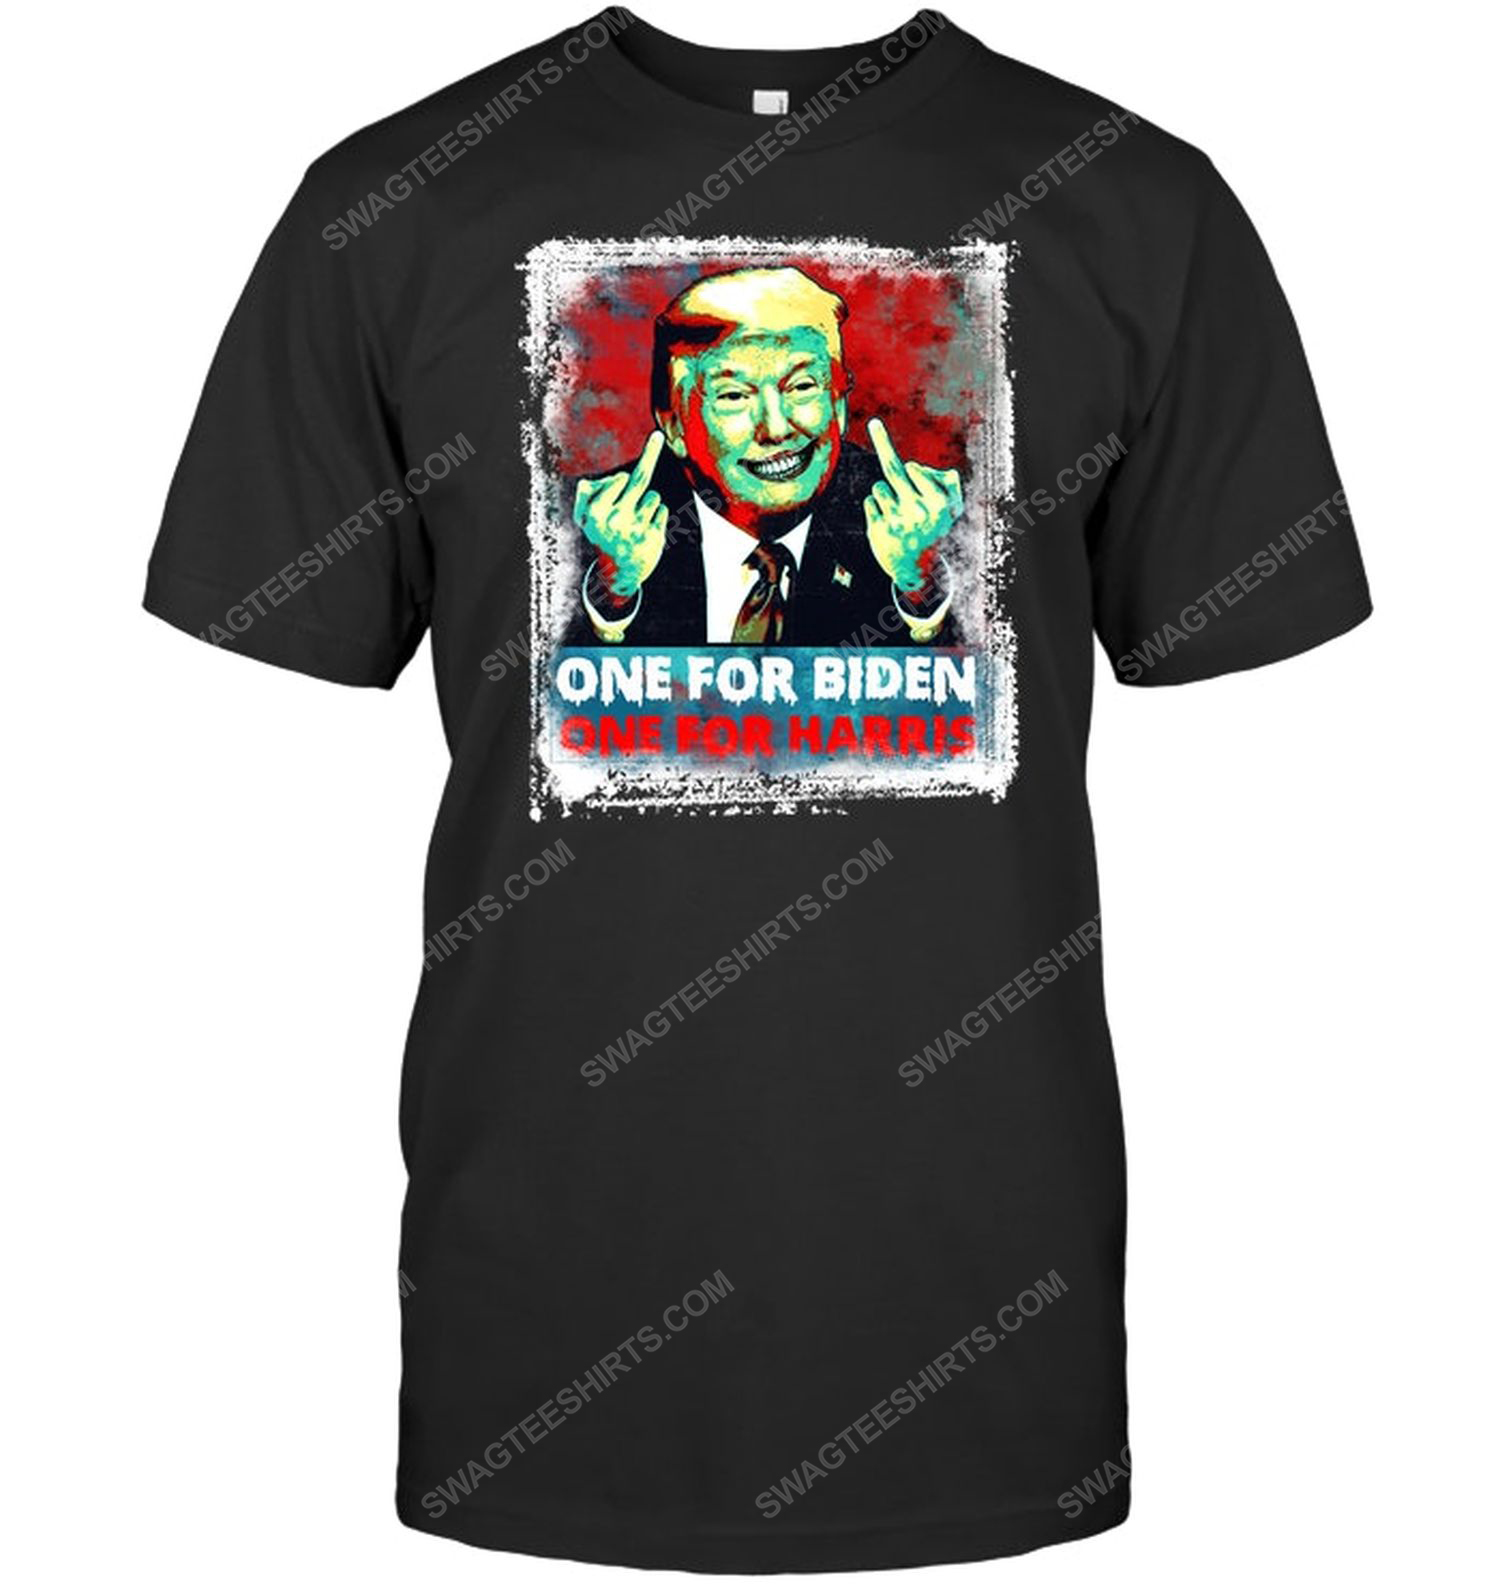 One for biden one for harris trump middle finger political tshirt